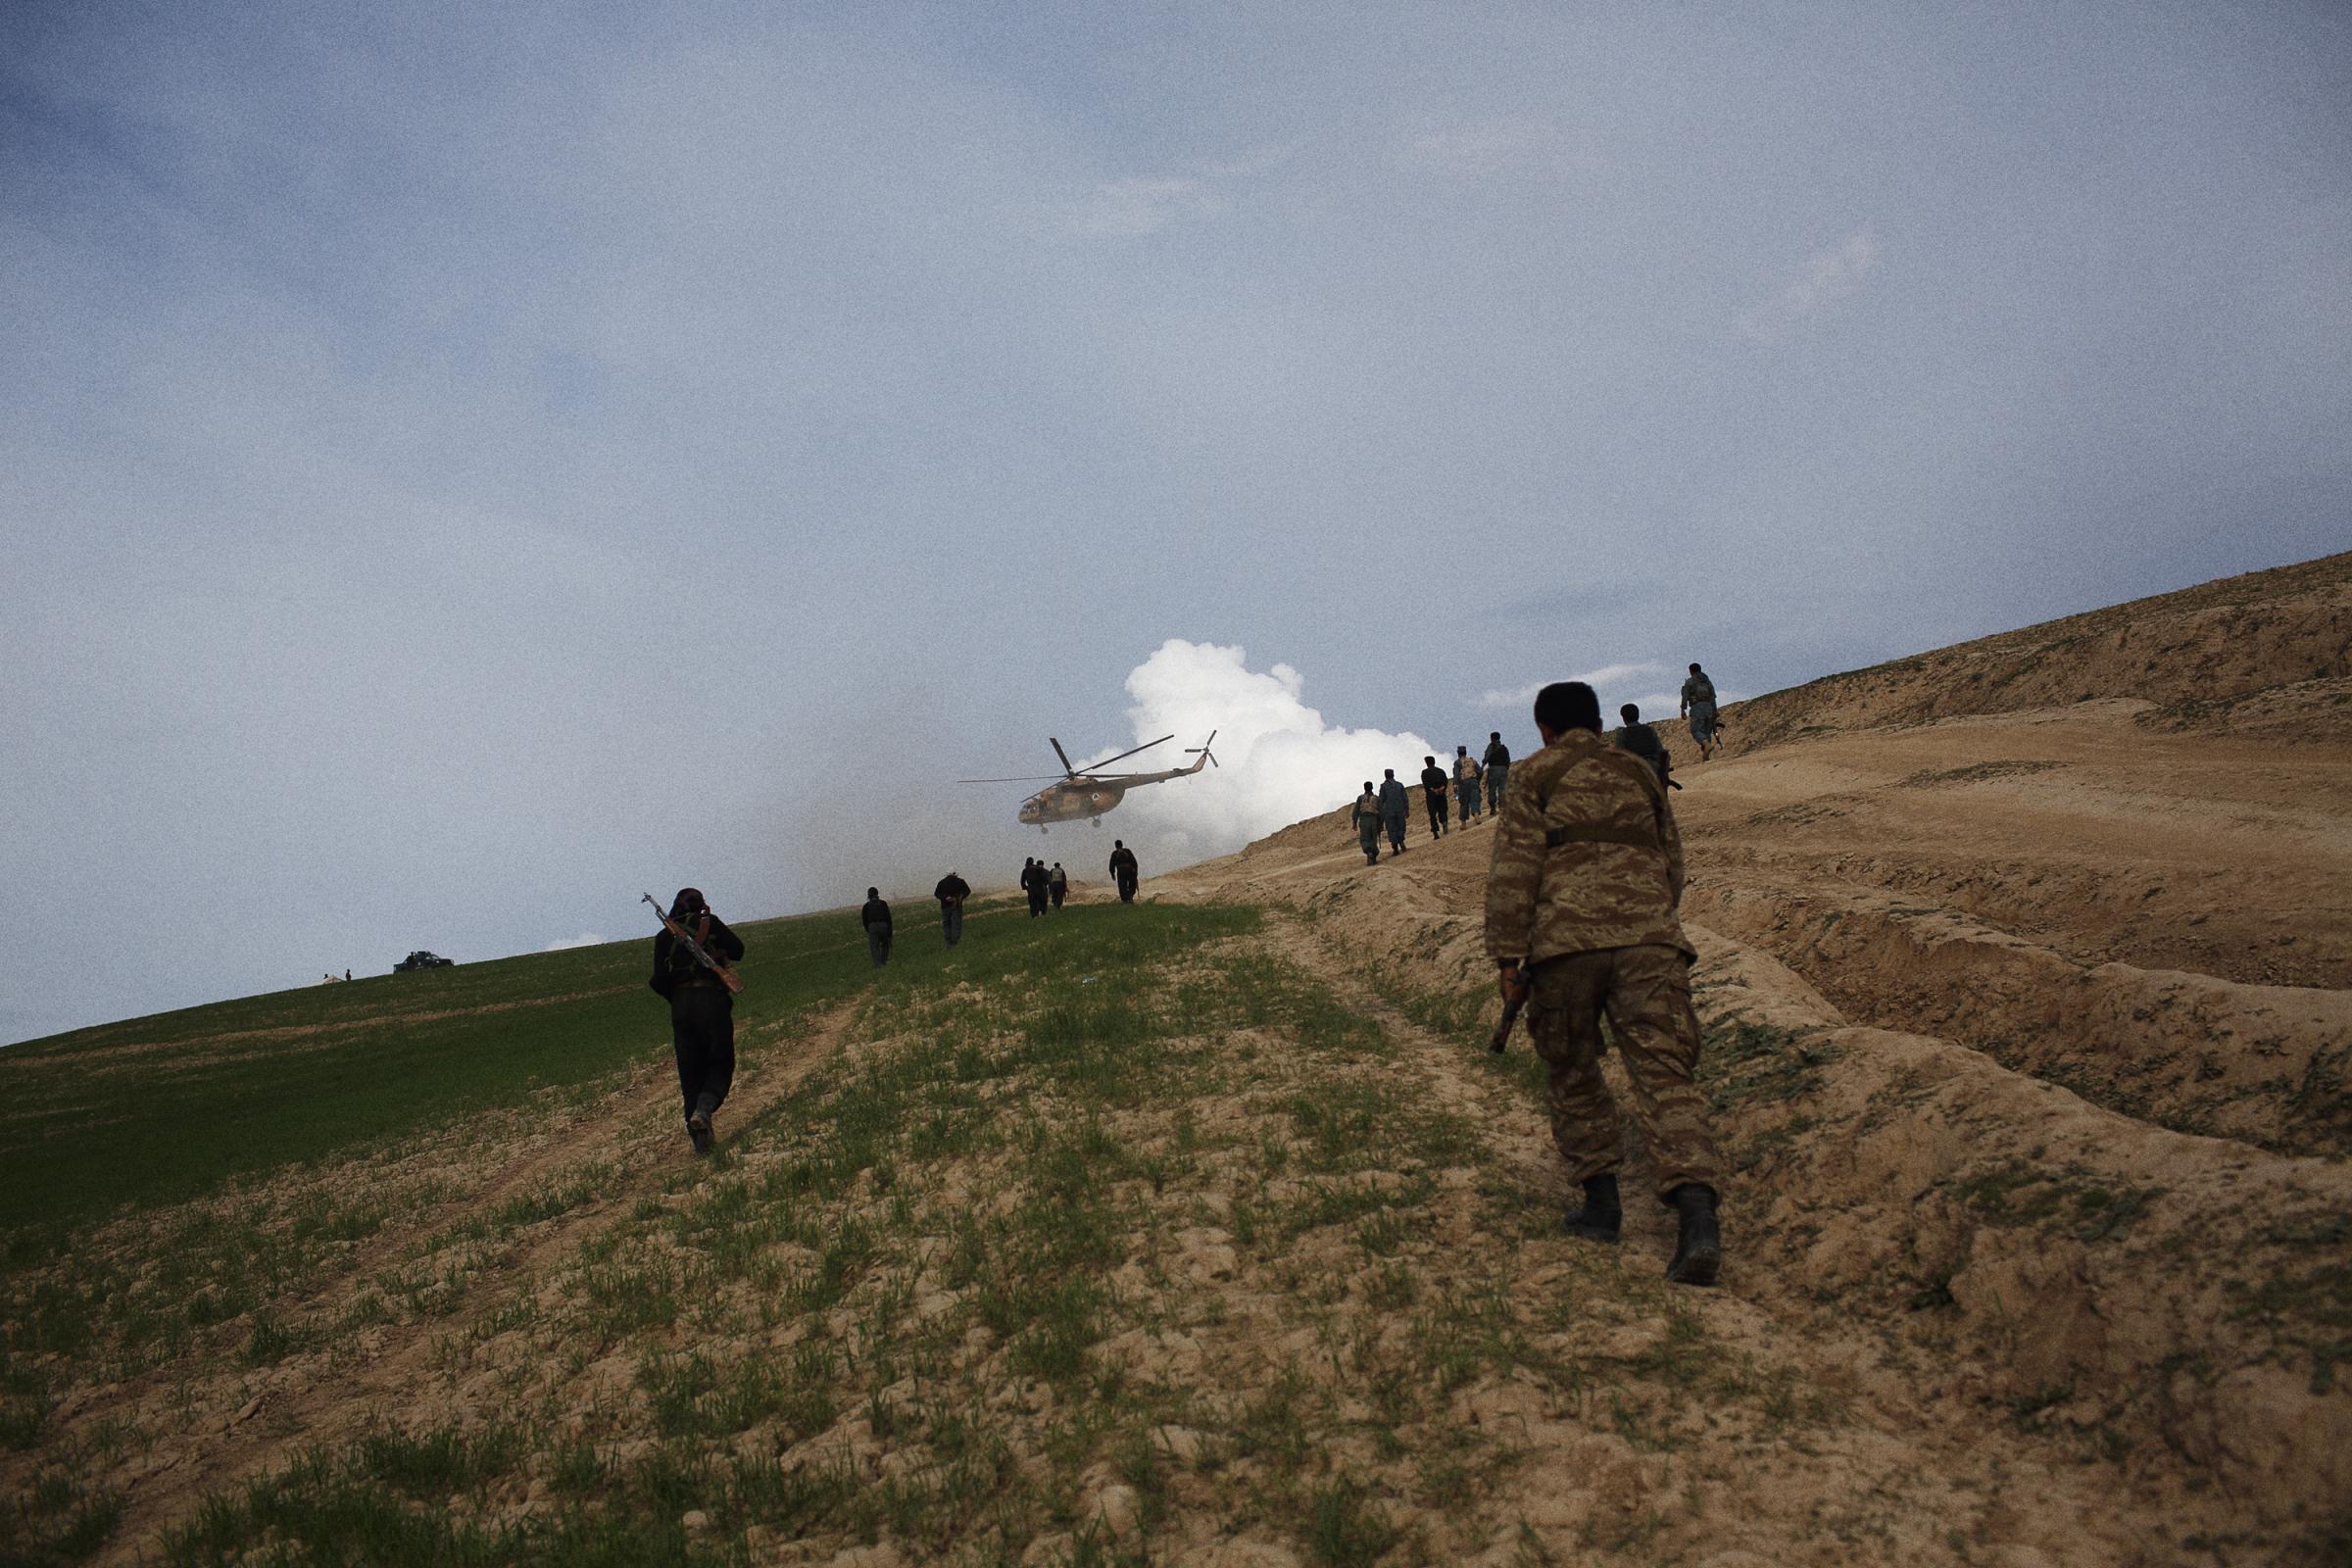 Police climb a hill to guard a helicopter aid delivery, May 6, 2014.